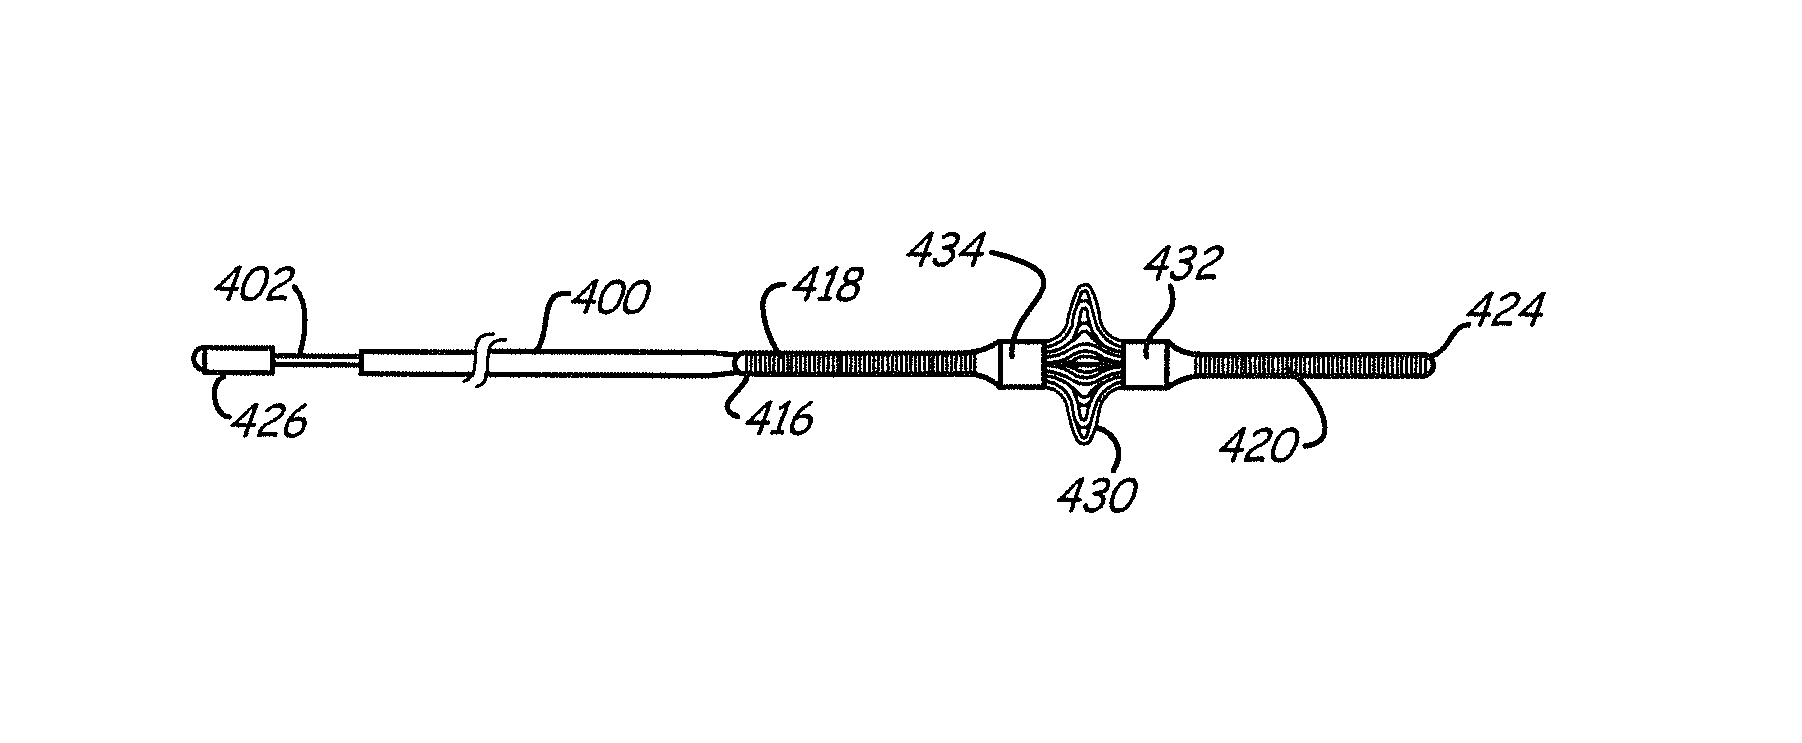 Steerable device having a corewire within a tube and combination with a functional medical component